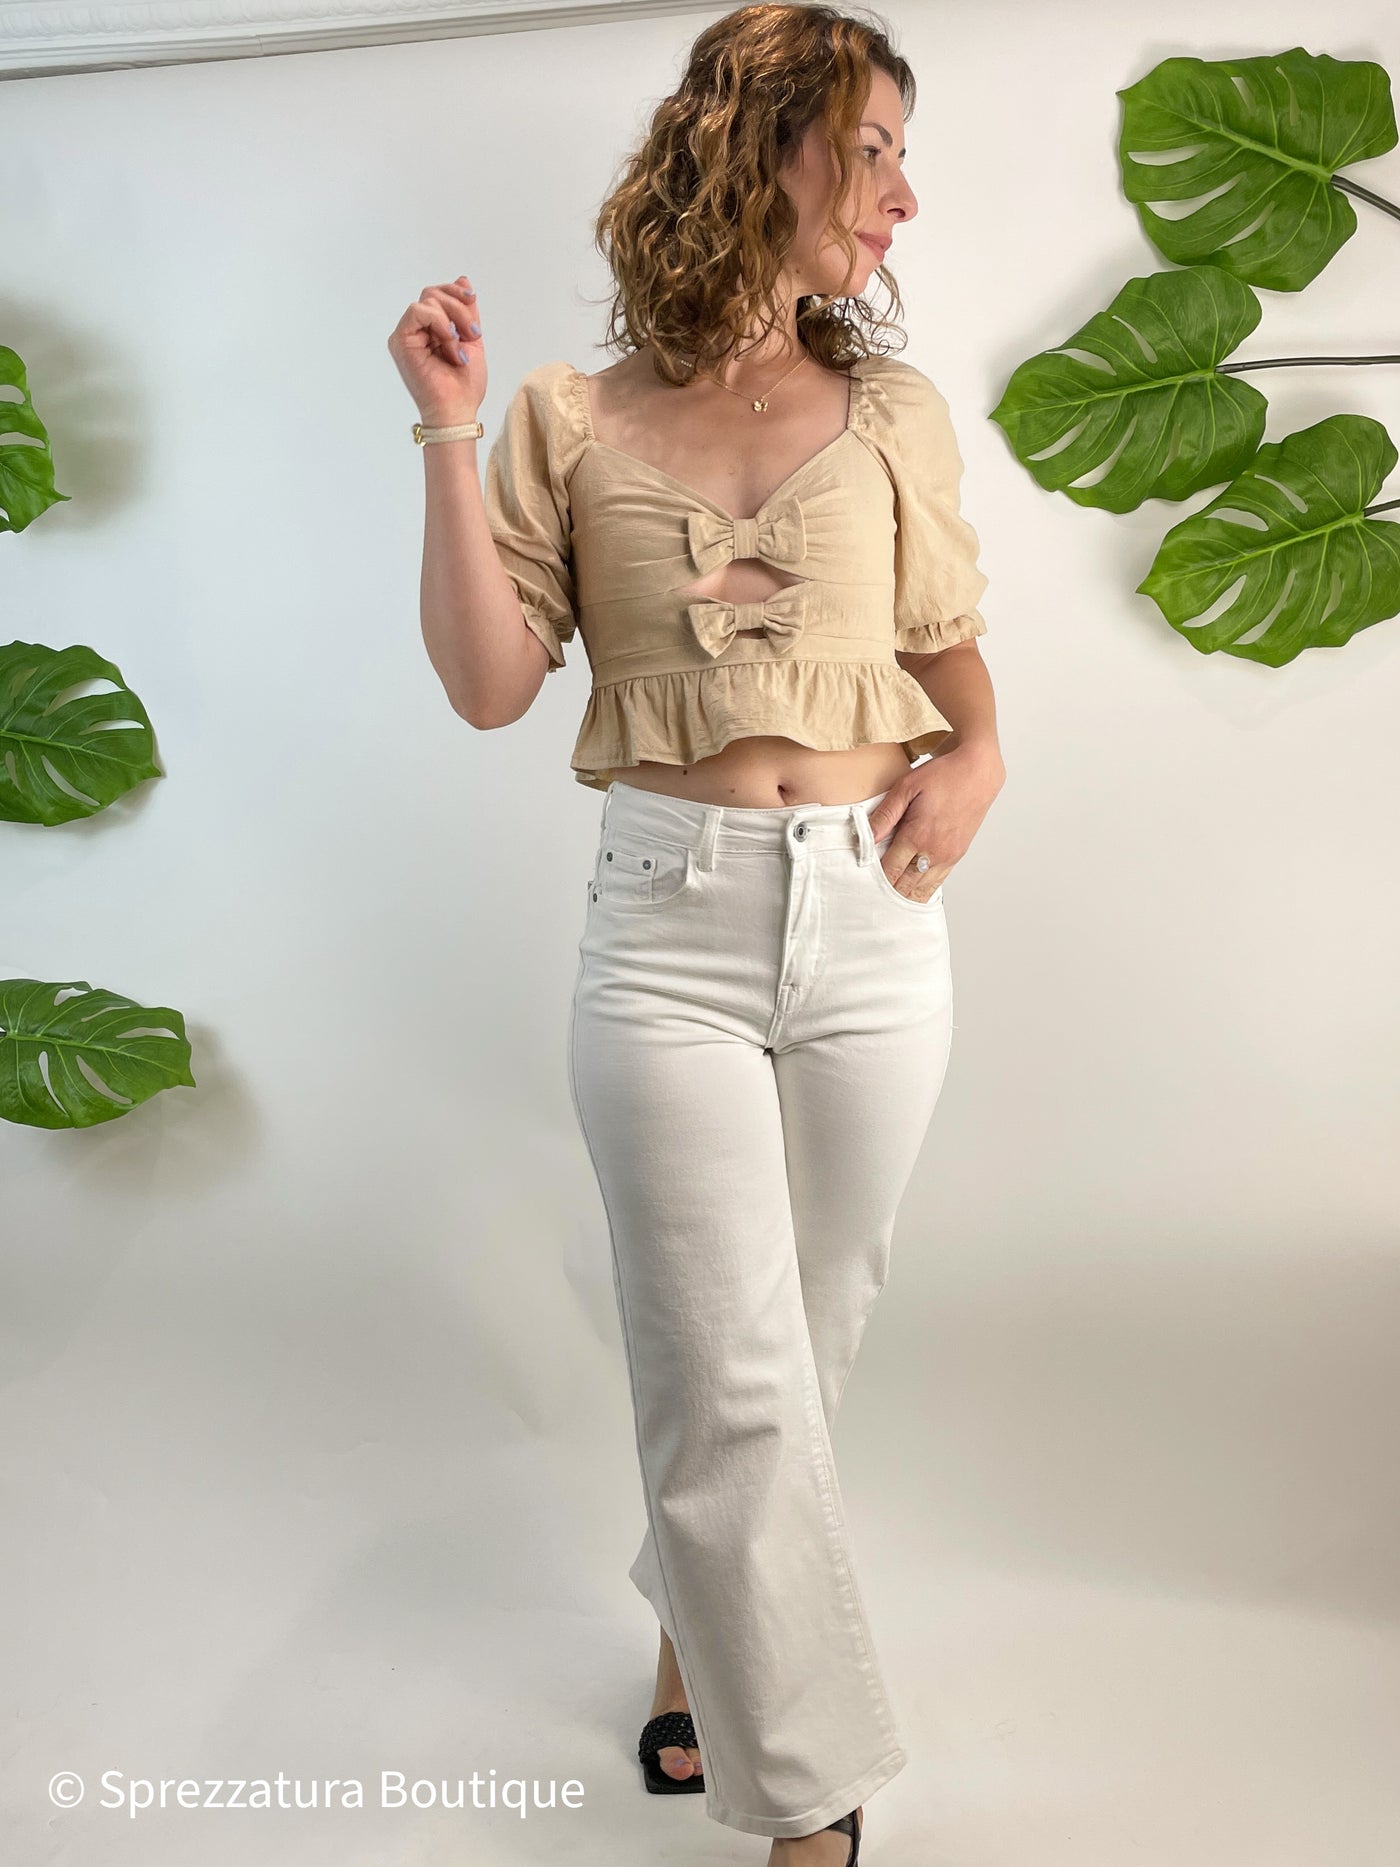 Neutral taupe color bow tie cut out detail blouse. Cropped top with ruffle adorable causal top with jeans or shorts. Natural color women's blouse for summer or fall with bows and ruffles. Cutout detail